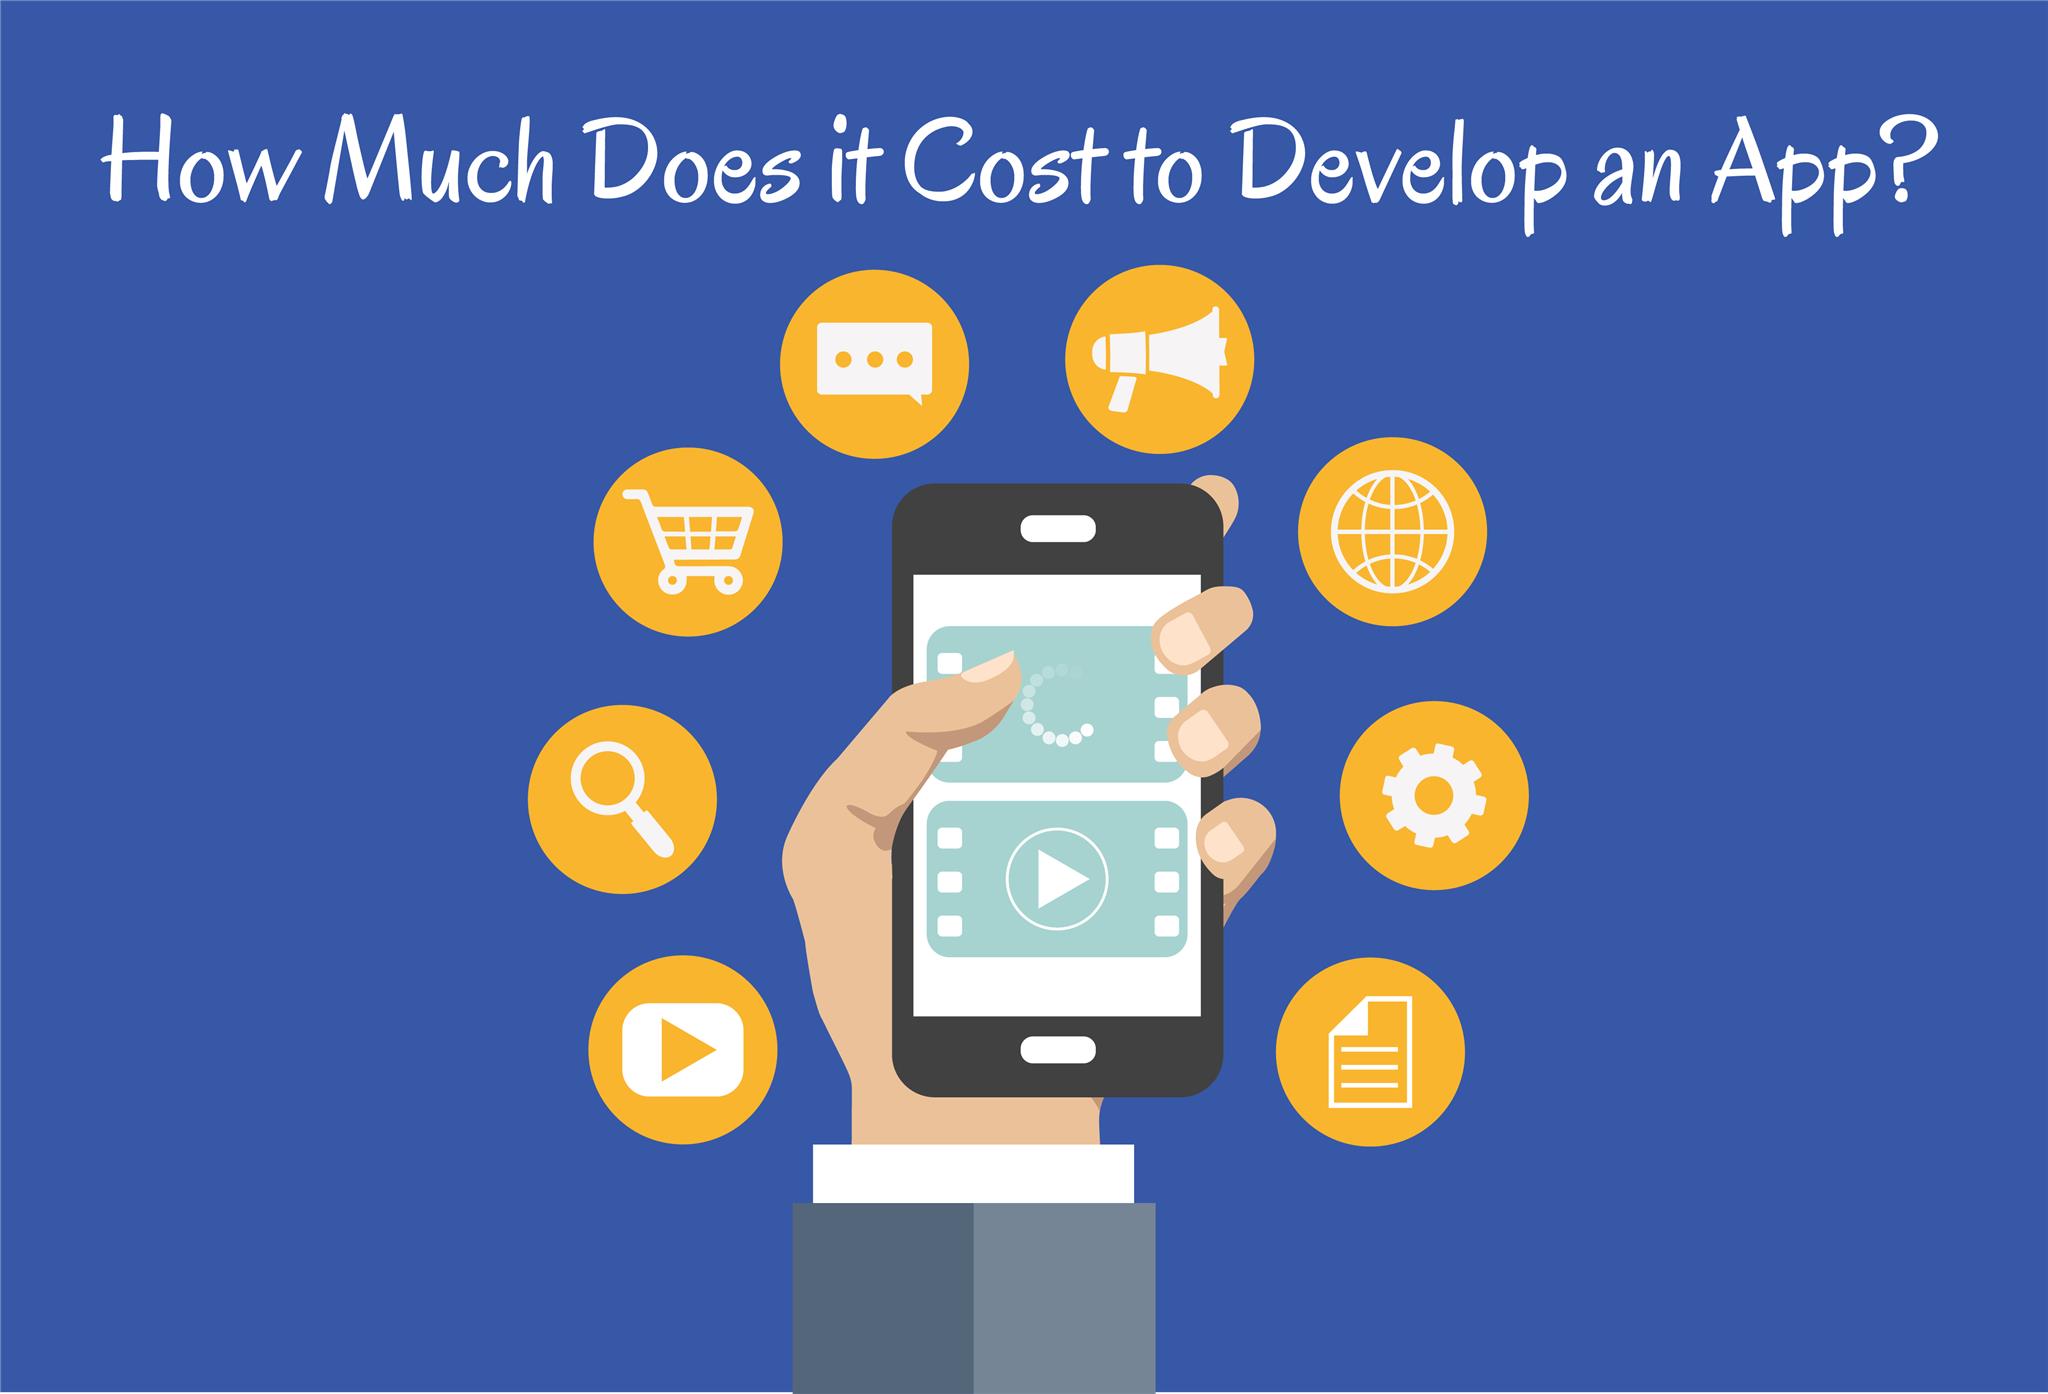 How Much Does It Cost to Create a Mobile App?